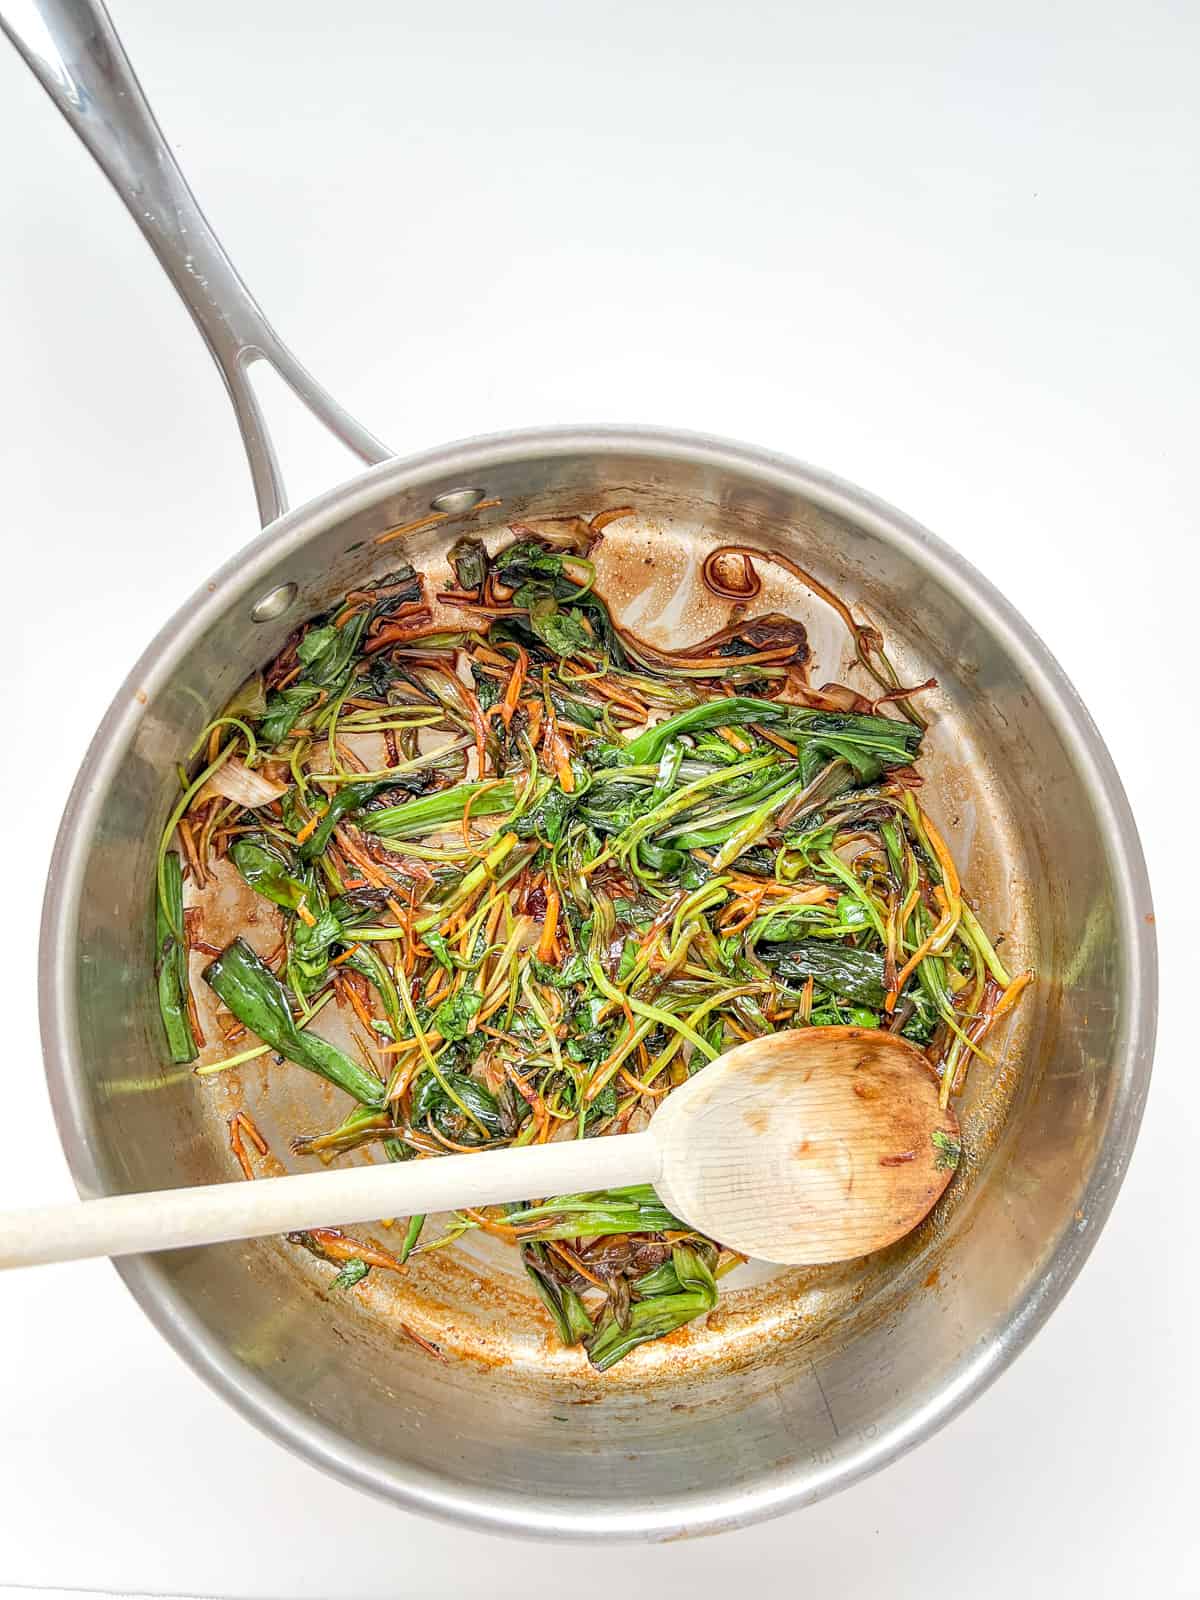 An image of the vegetables used in this recipe cooked inside a saute pan.